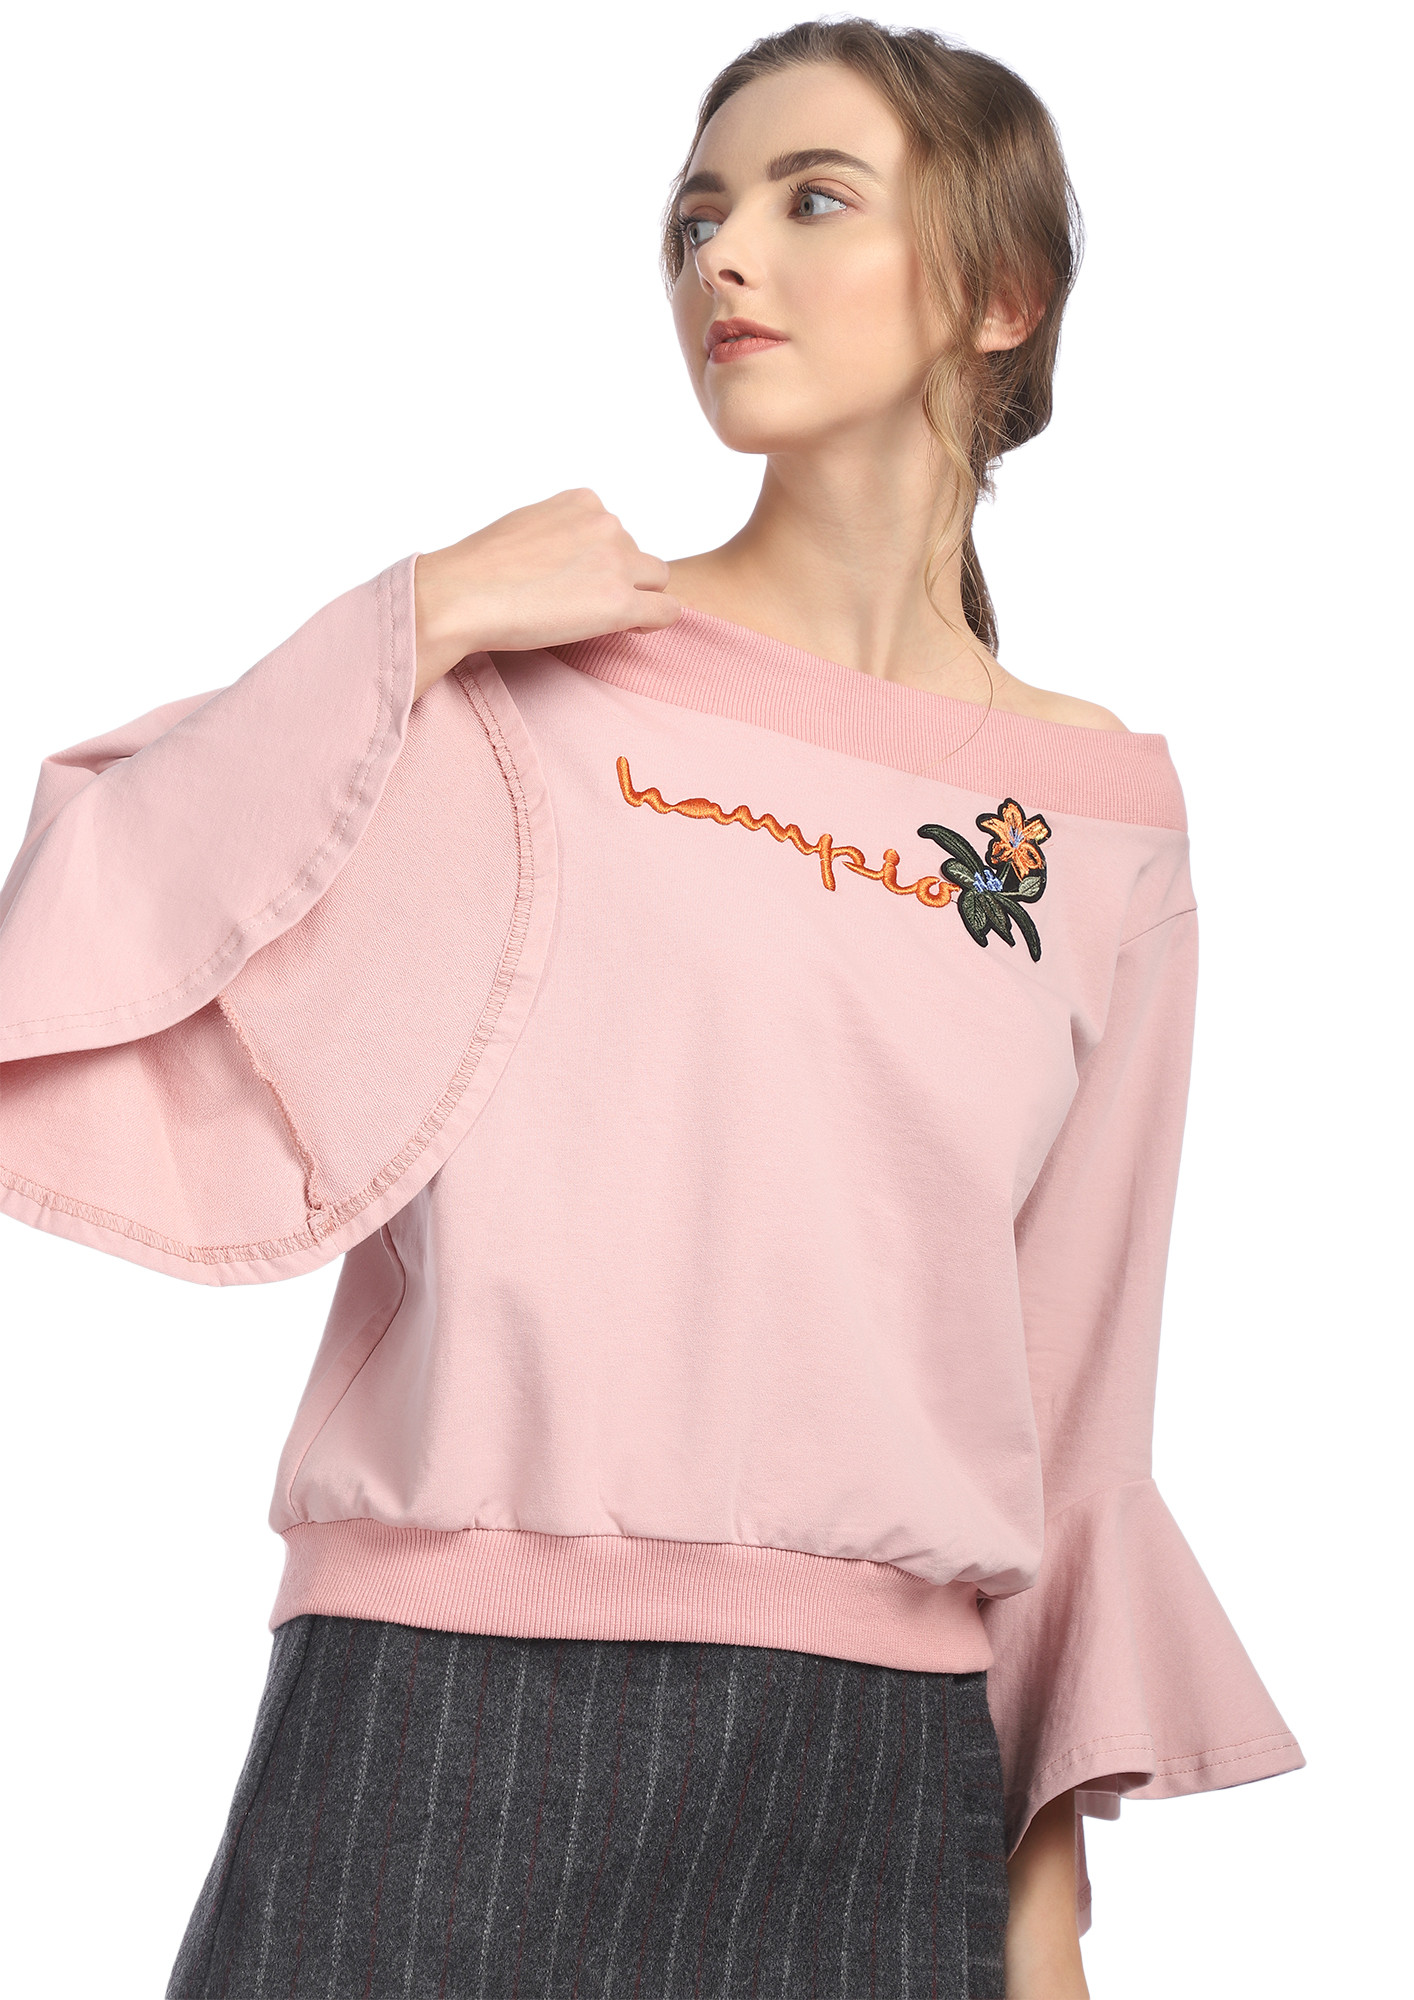 THE DARLING NUDE PINK JUMPER